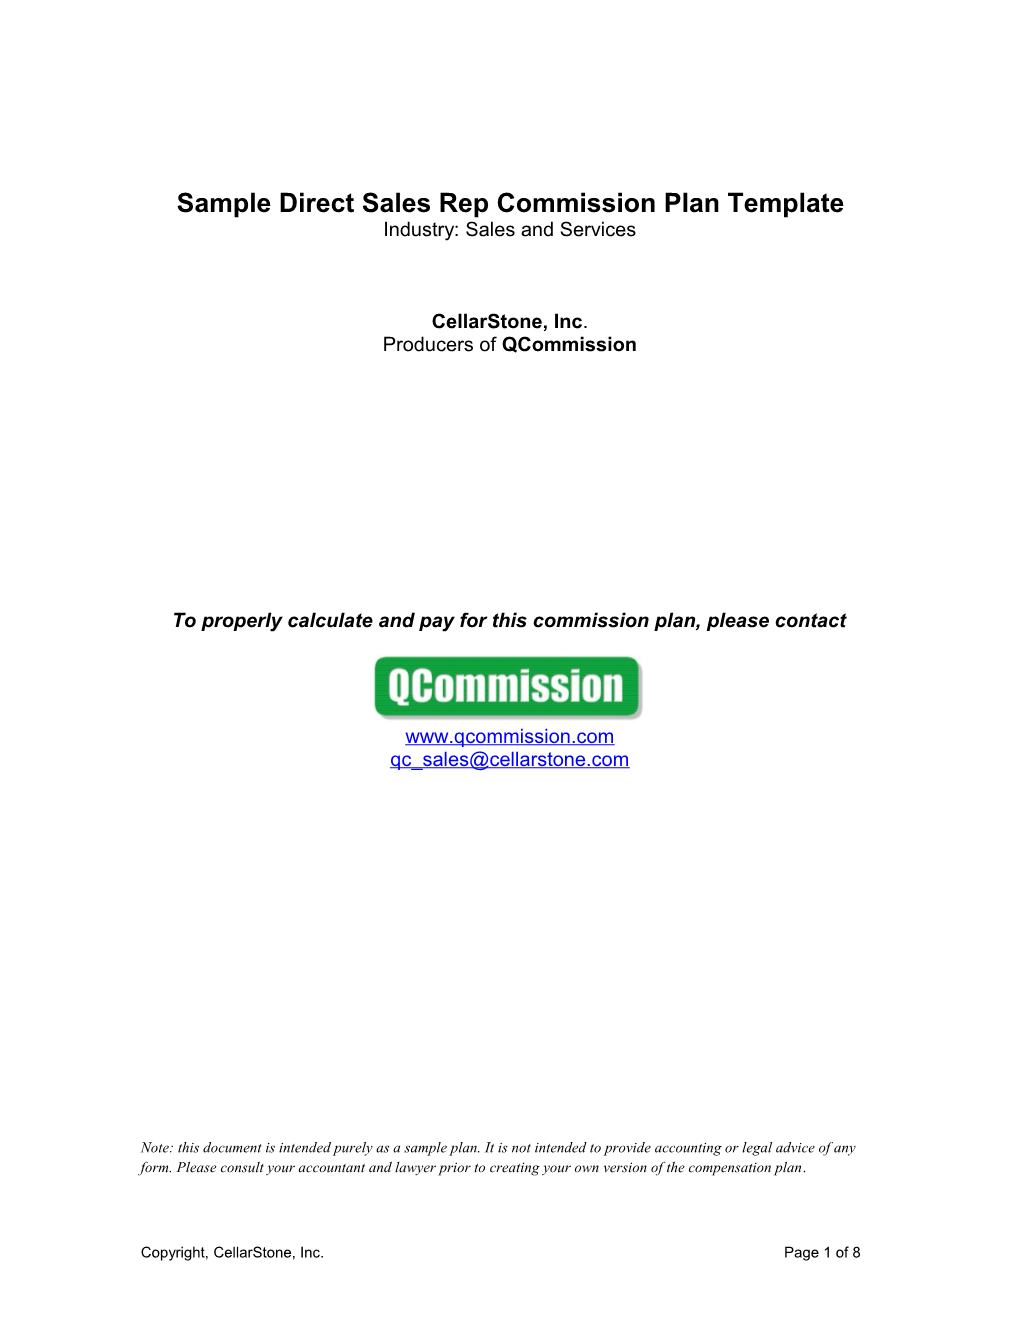 Sample-Direct-Sales-Rep-Sales-Commission-Agreement-Template